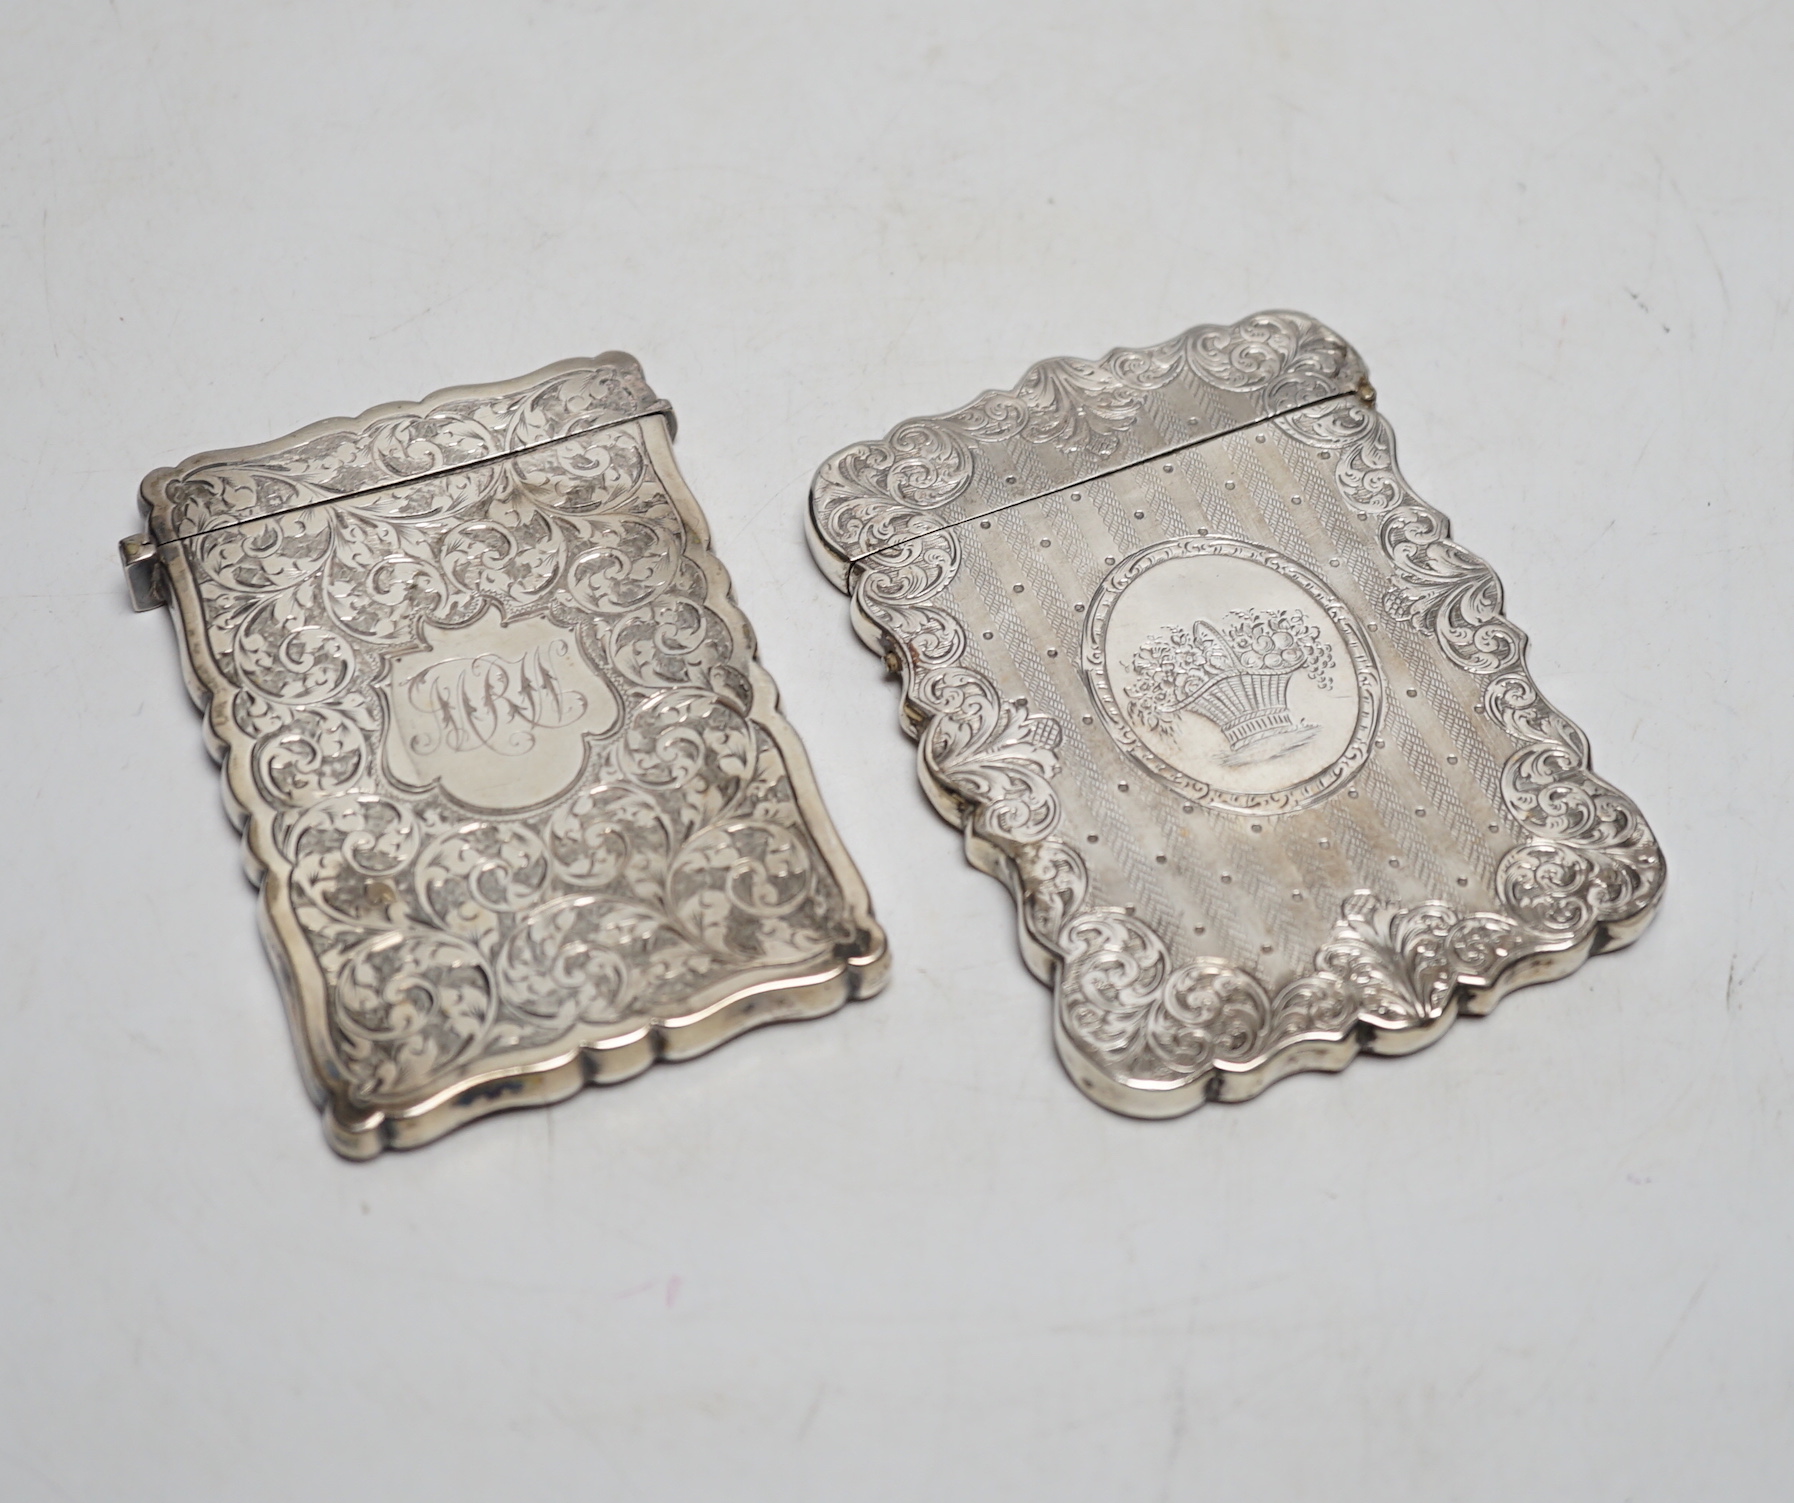 Two Victorian engraved silver card cases, largest by Hilliard & Thomasson, Birmingham, 1850, 10.1cm.